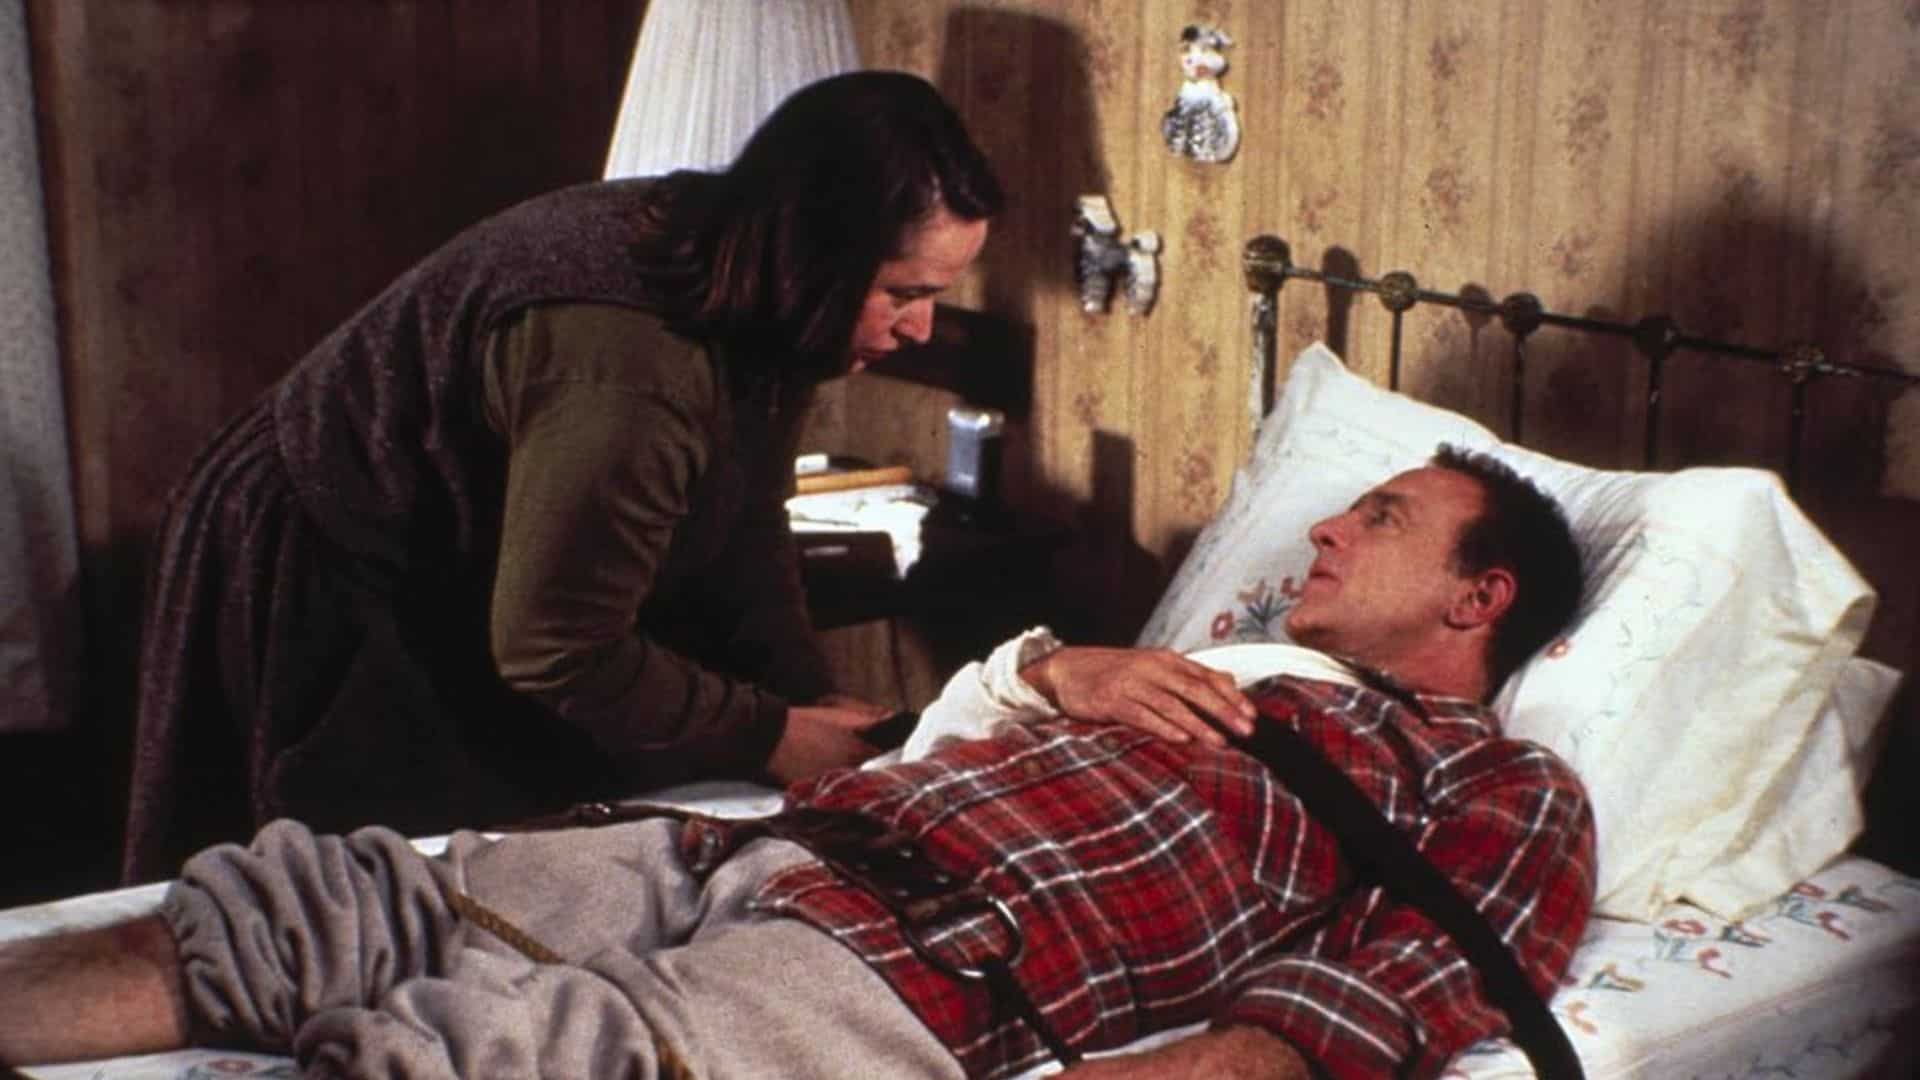 A woman straps a man to a bed in this image from Castle Rock Entertainment.